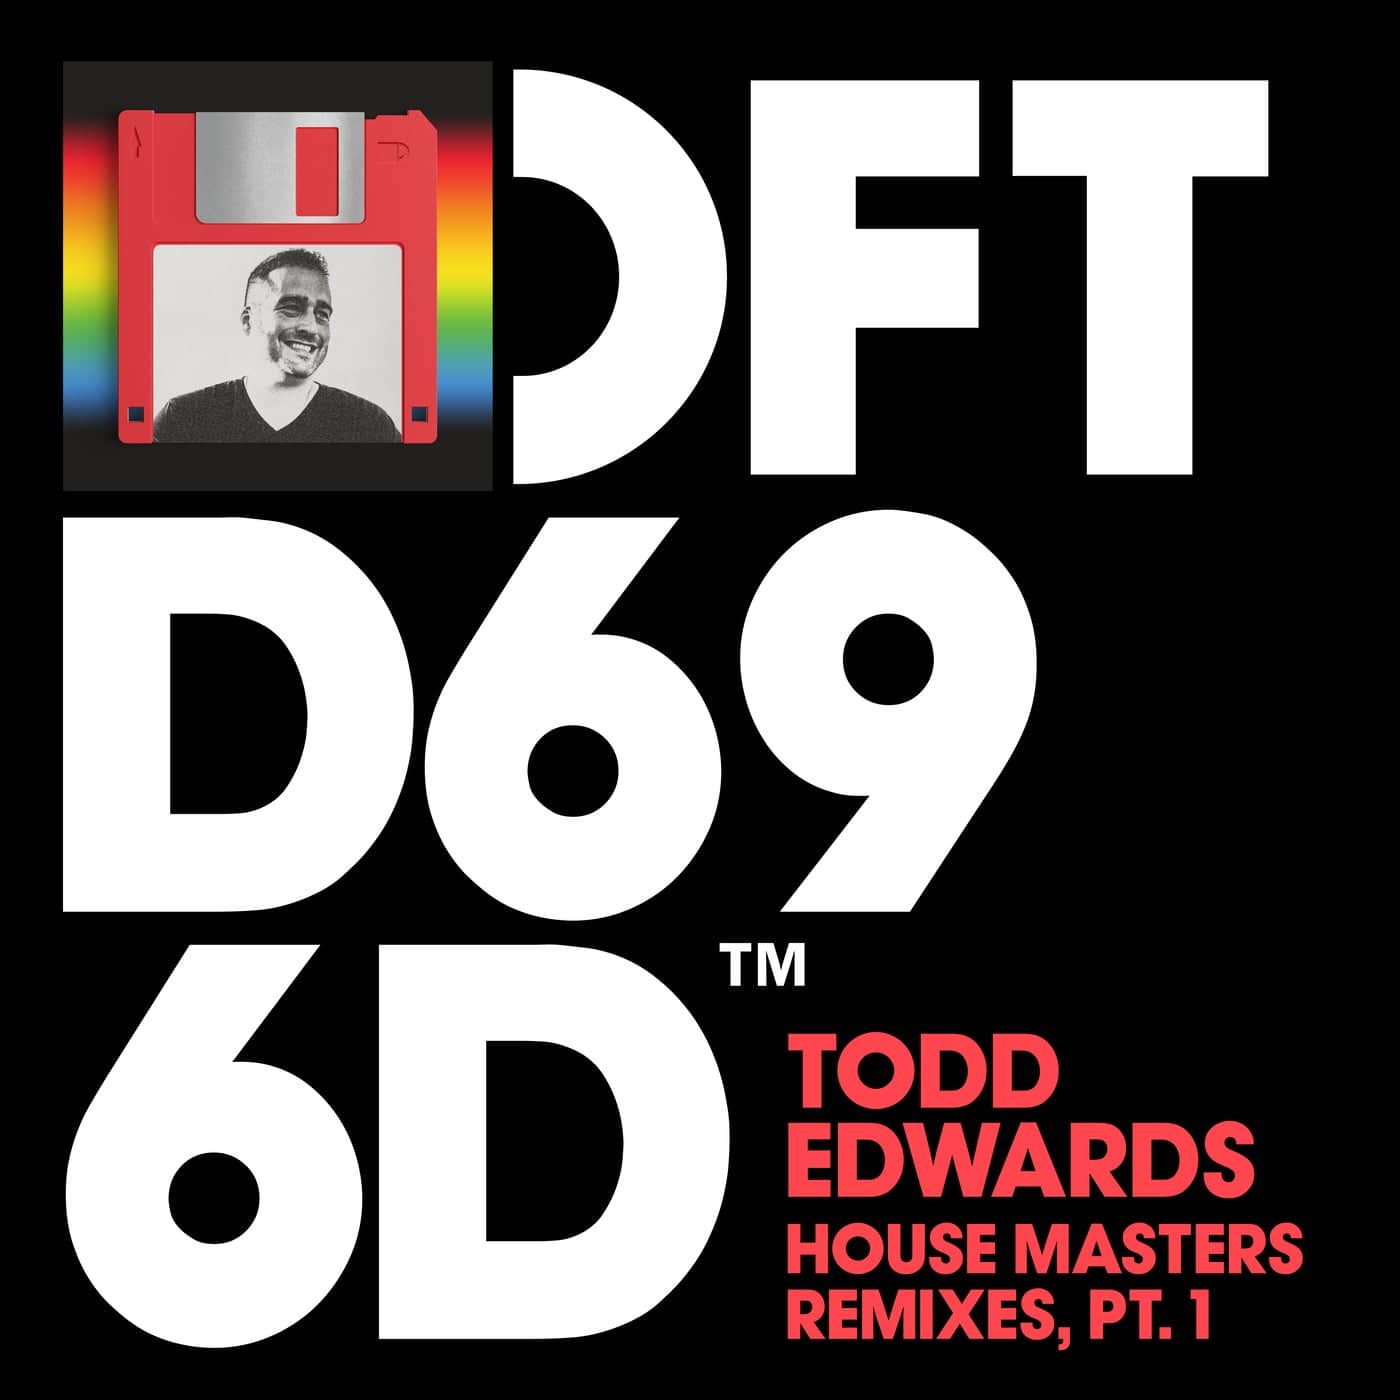 image cover: House Masters Remixes, Pt. 1 by Todd Edwards on Defected